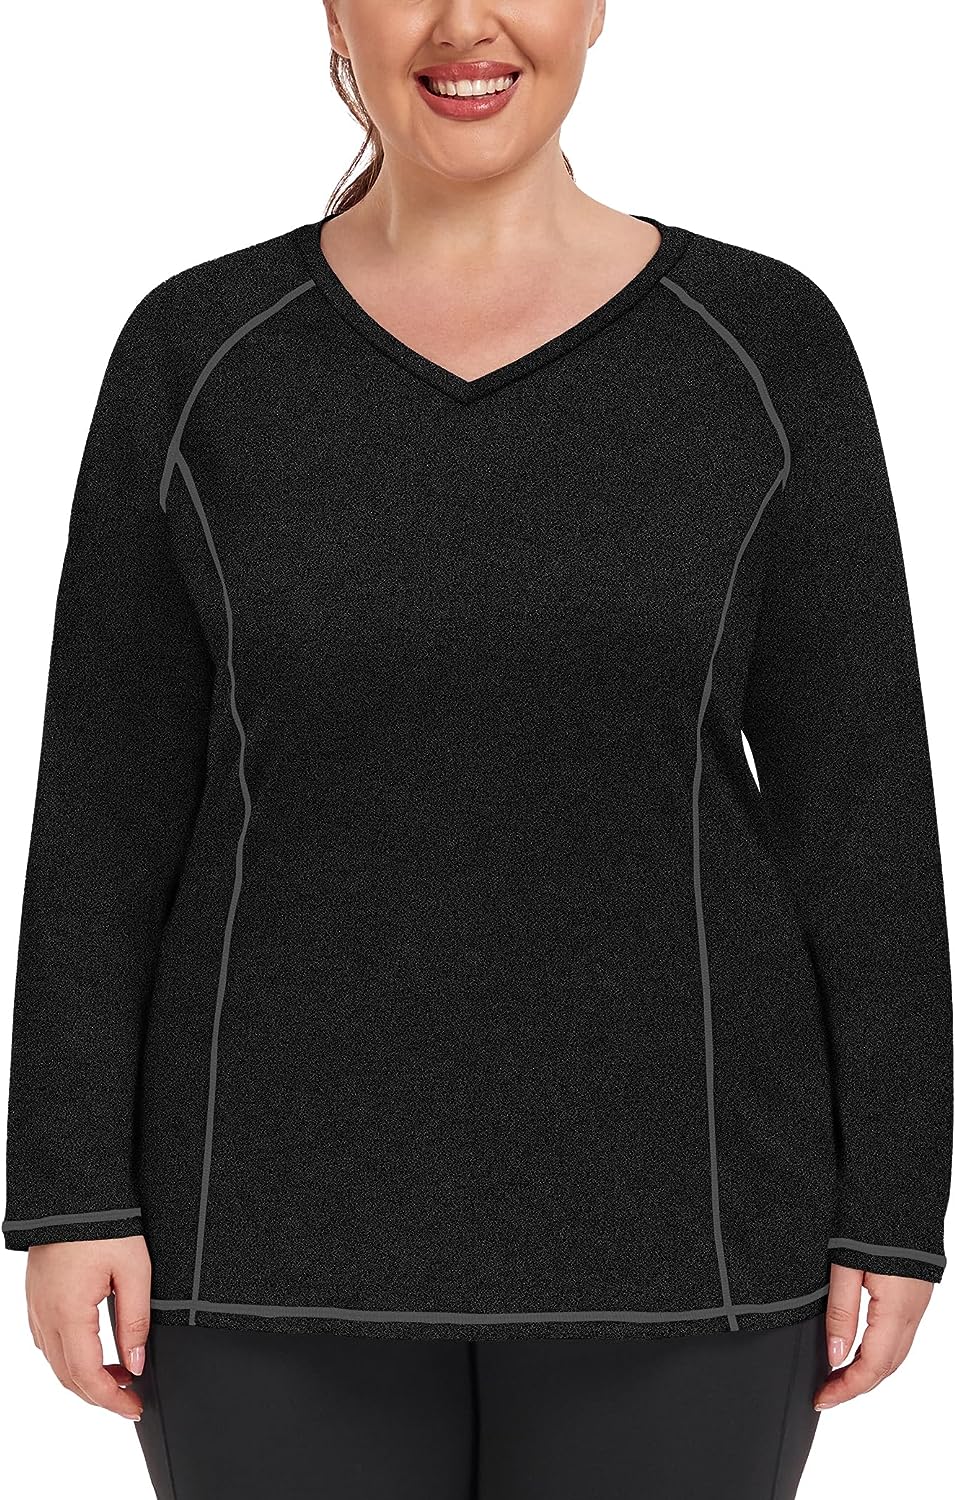 COOTRY Plus Size Workout Tops for Women Short  